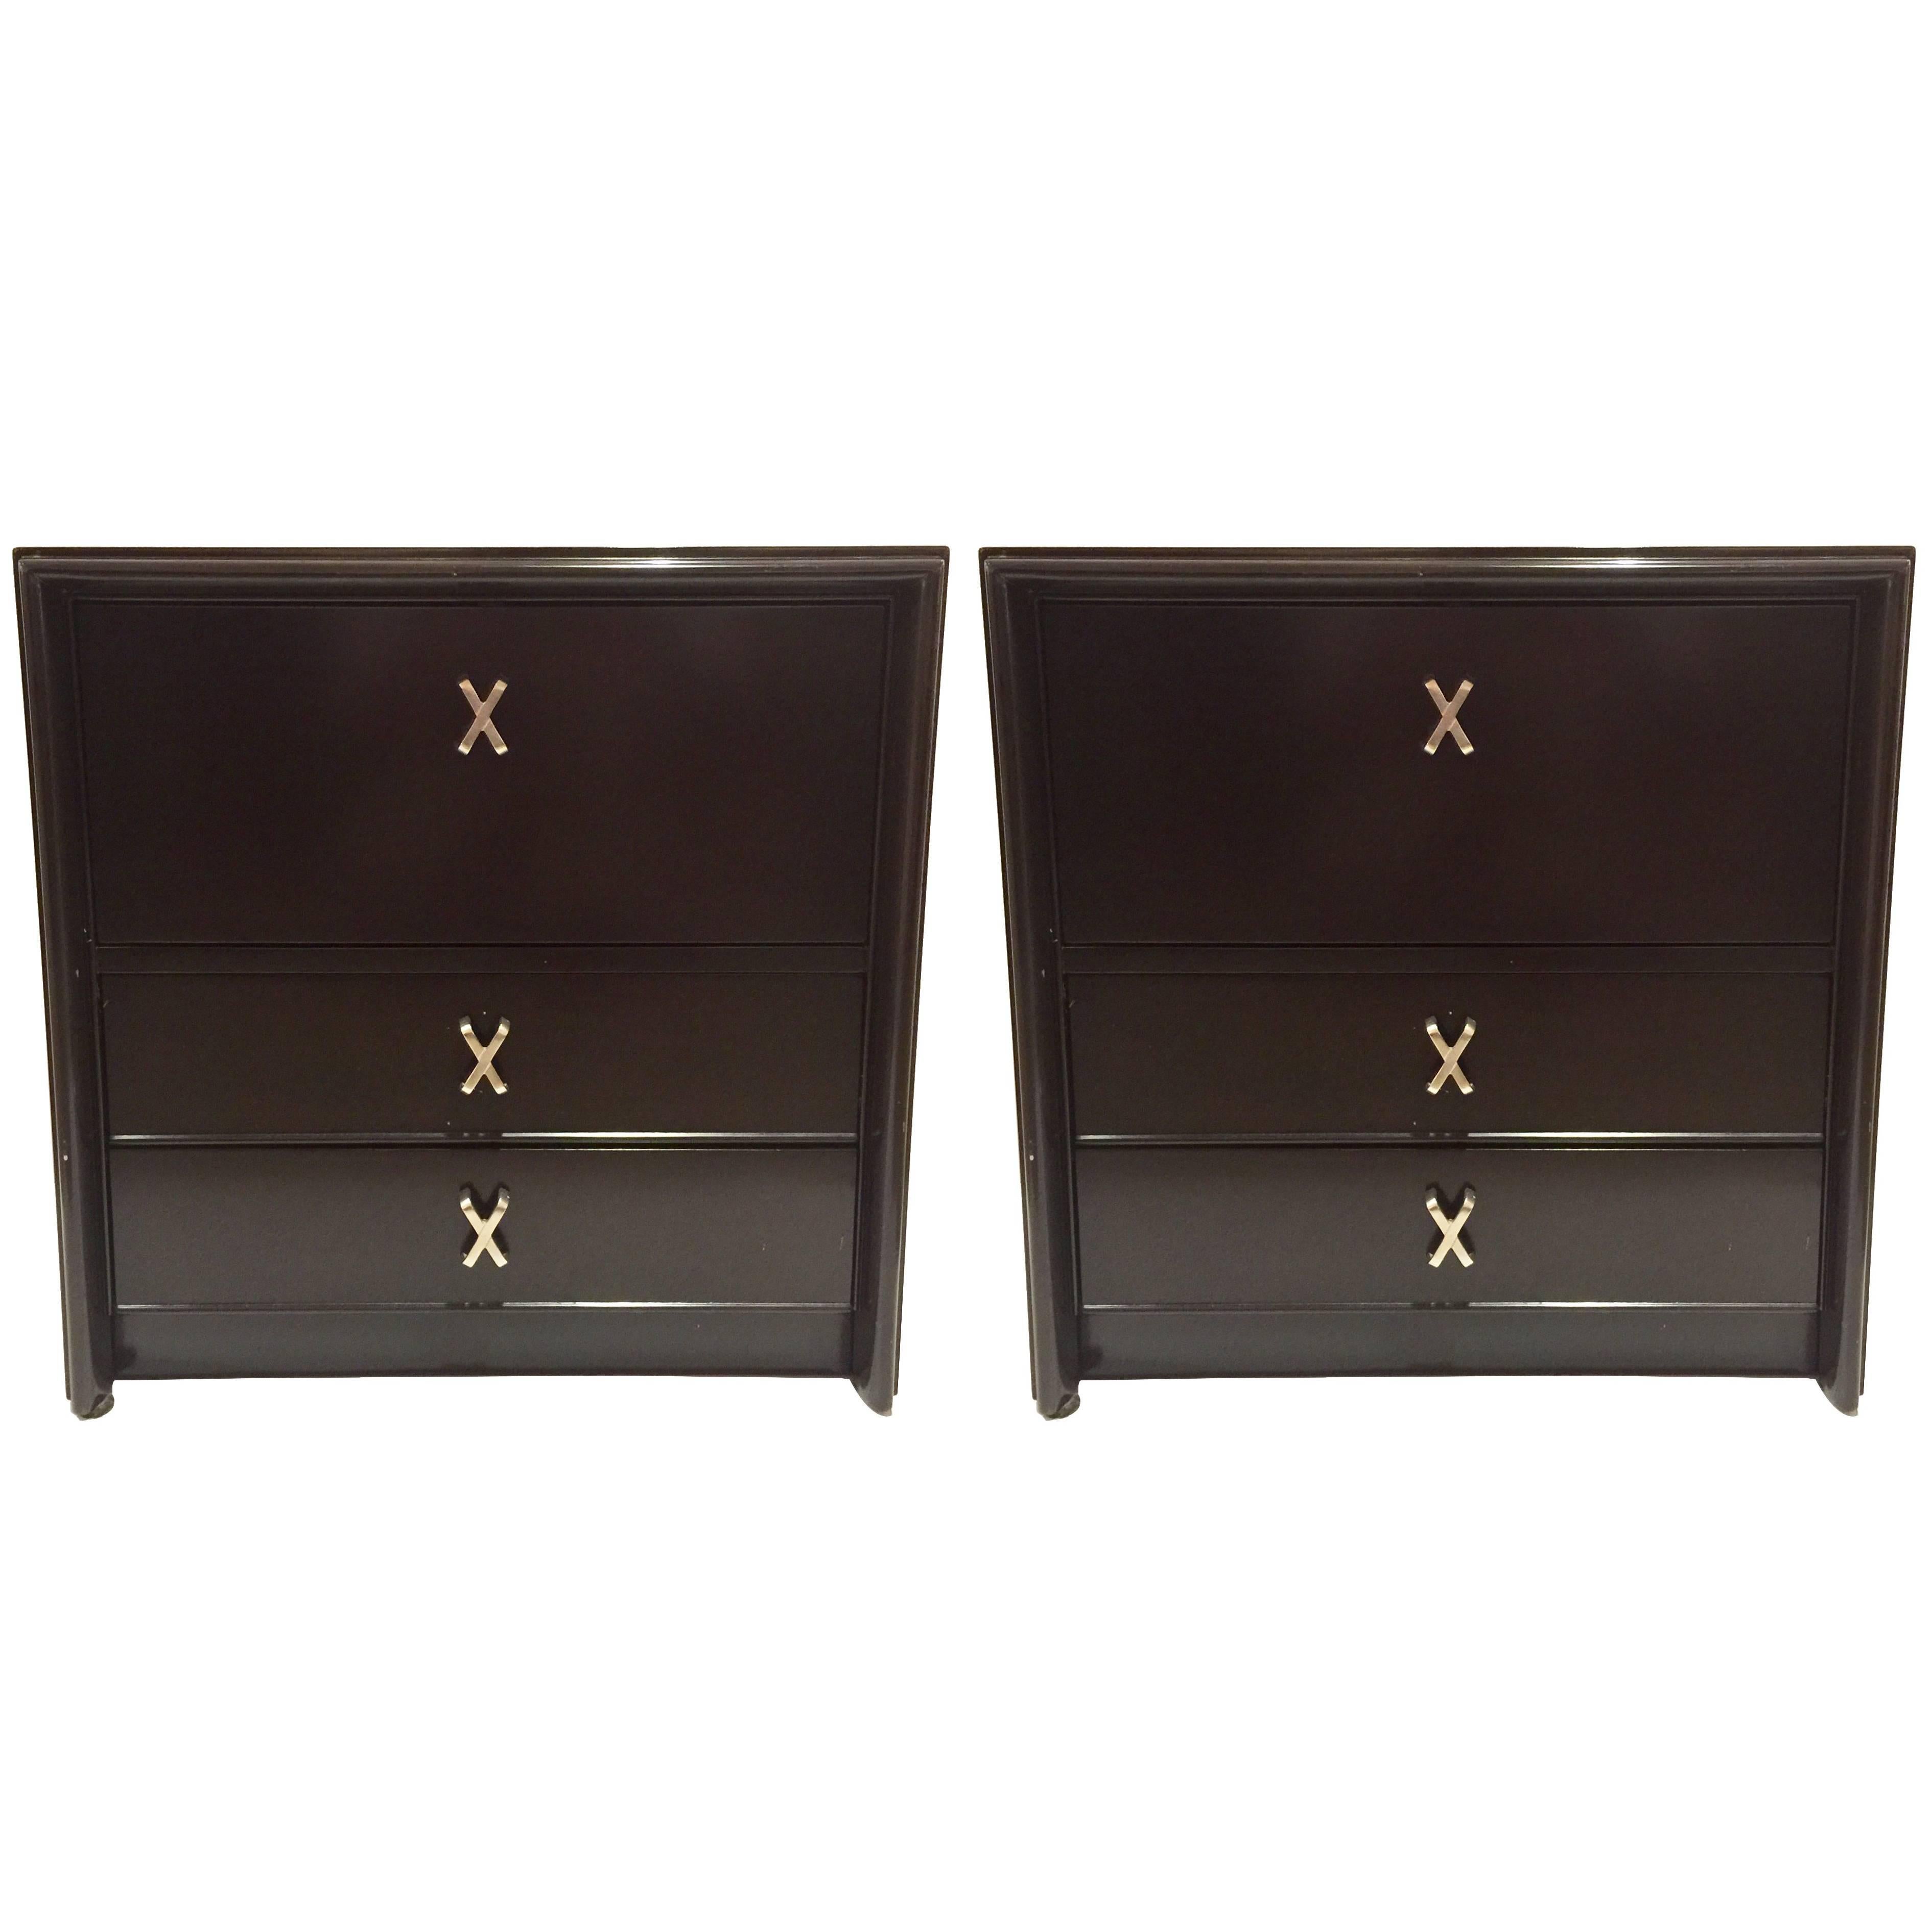 Pair of Espresso Mahogany Nightstands by Paul Frankl